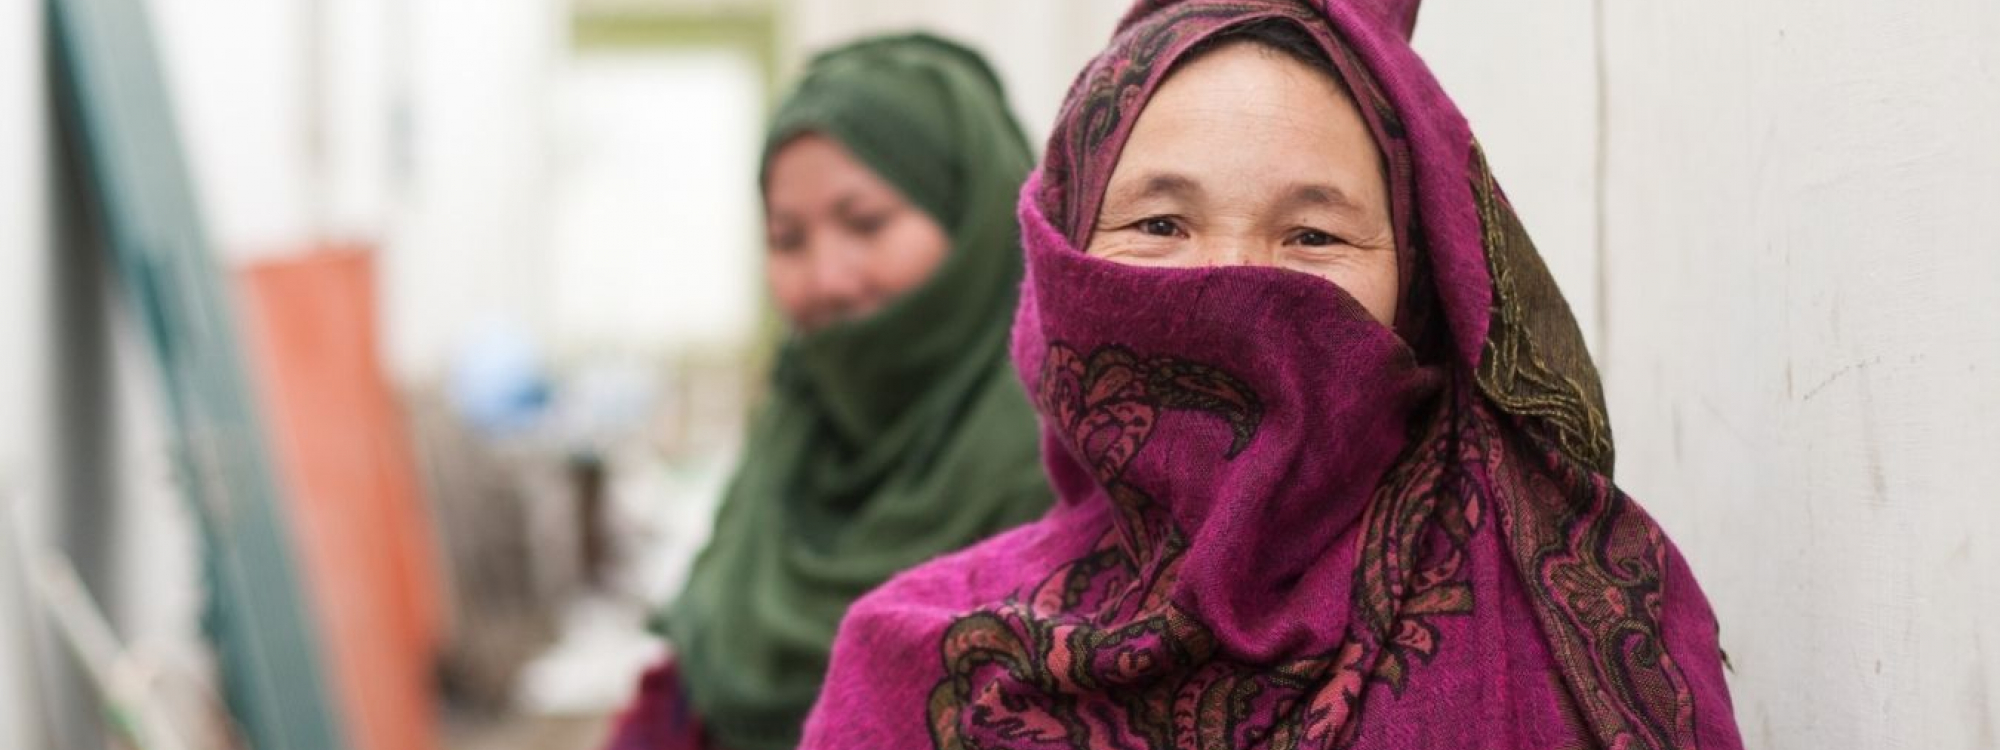 Afghan woman foregrounded wearing a bright pink scarf. Behind her a woman wears a green headscarf,